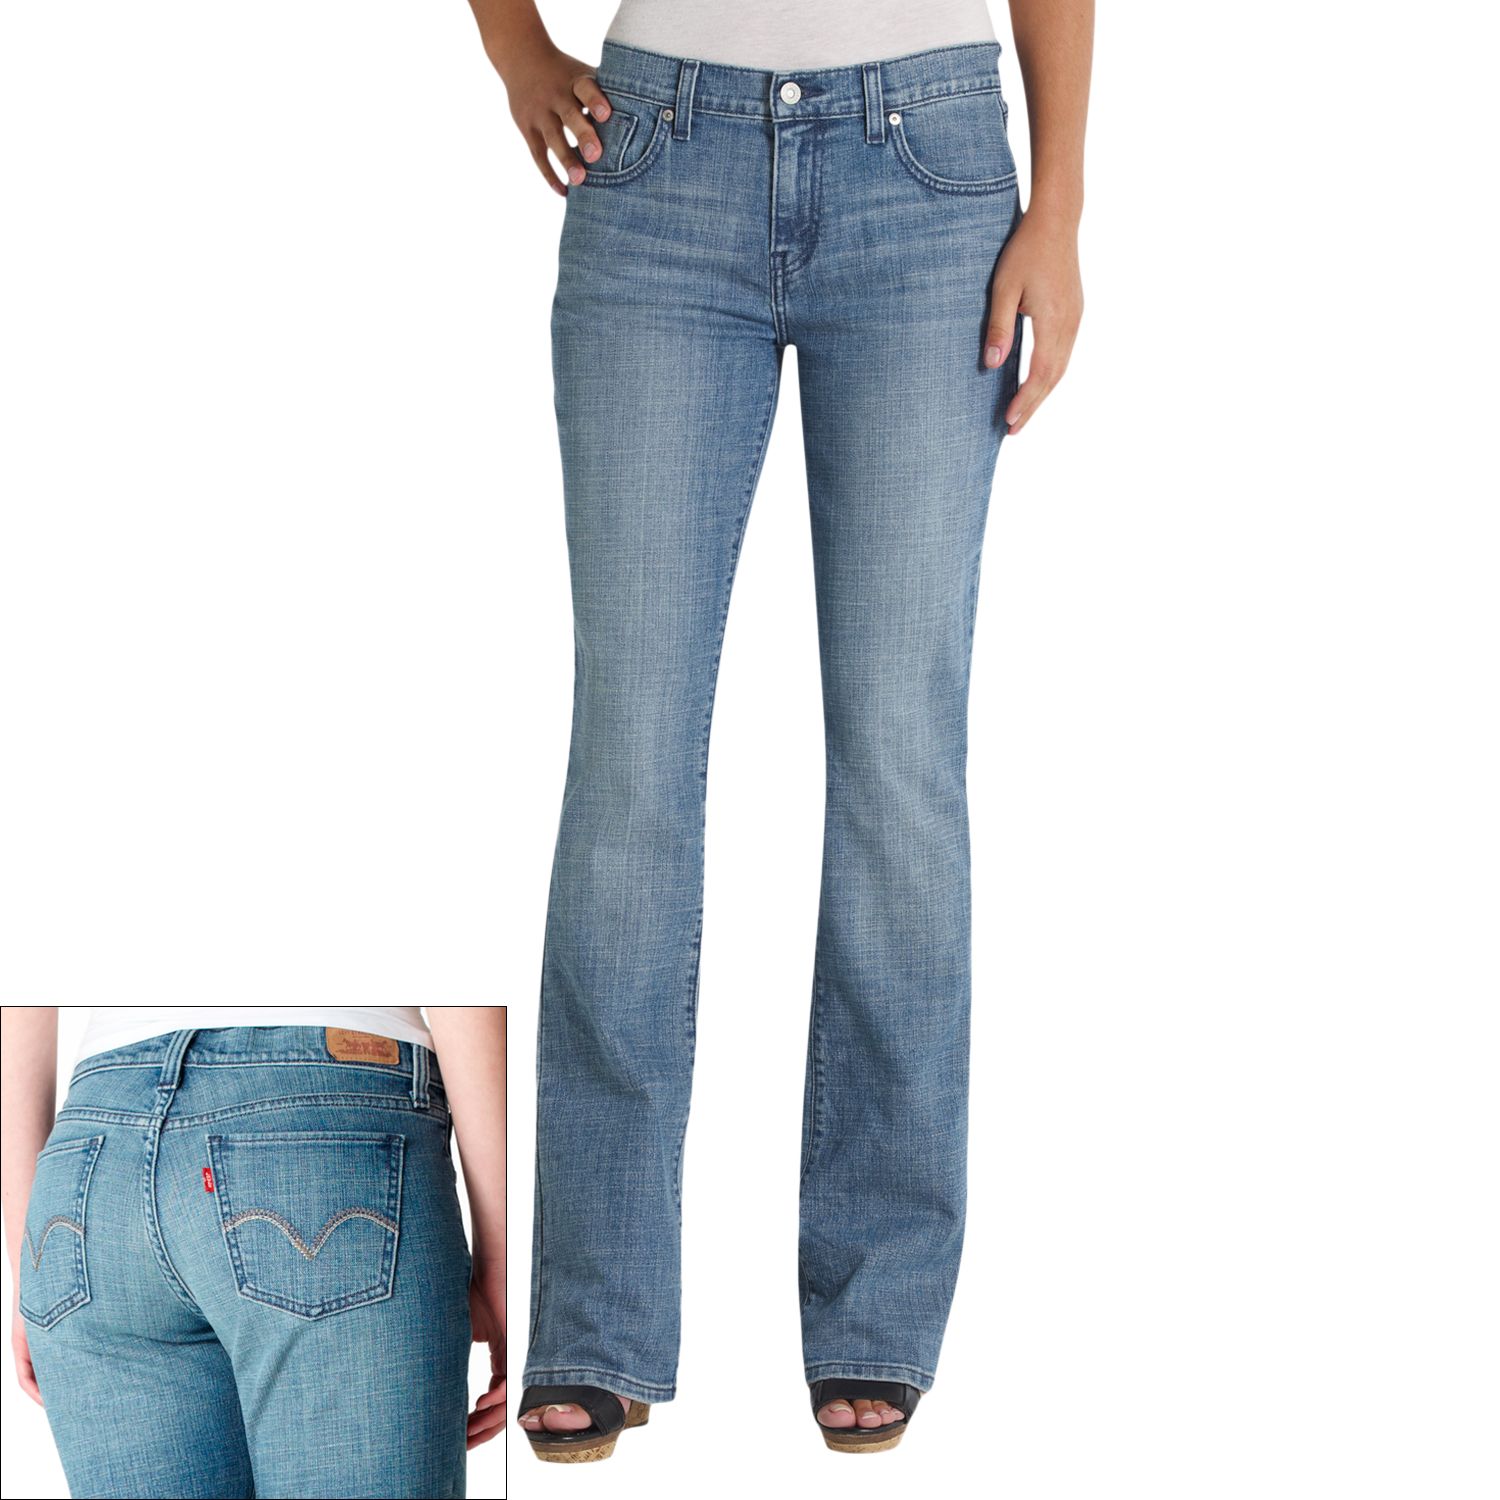 levi's 515 bootcut womens jeans